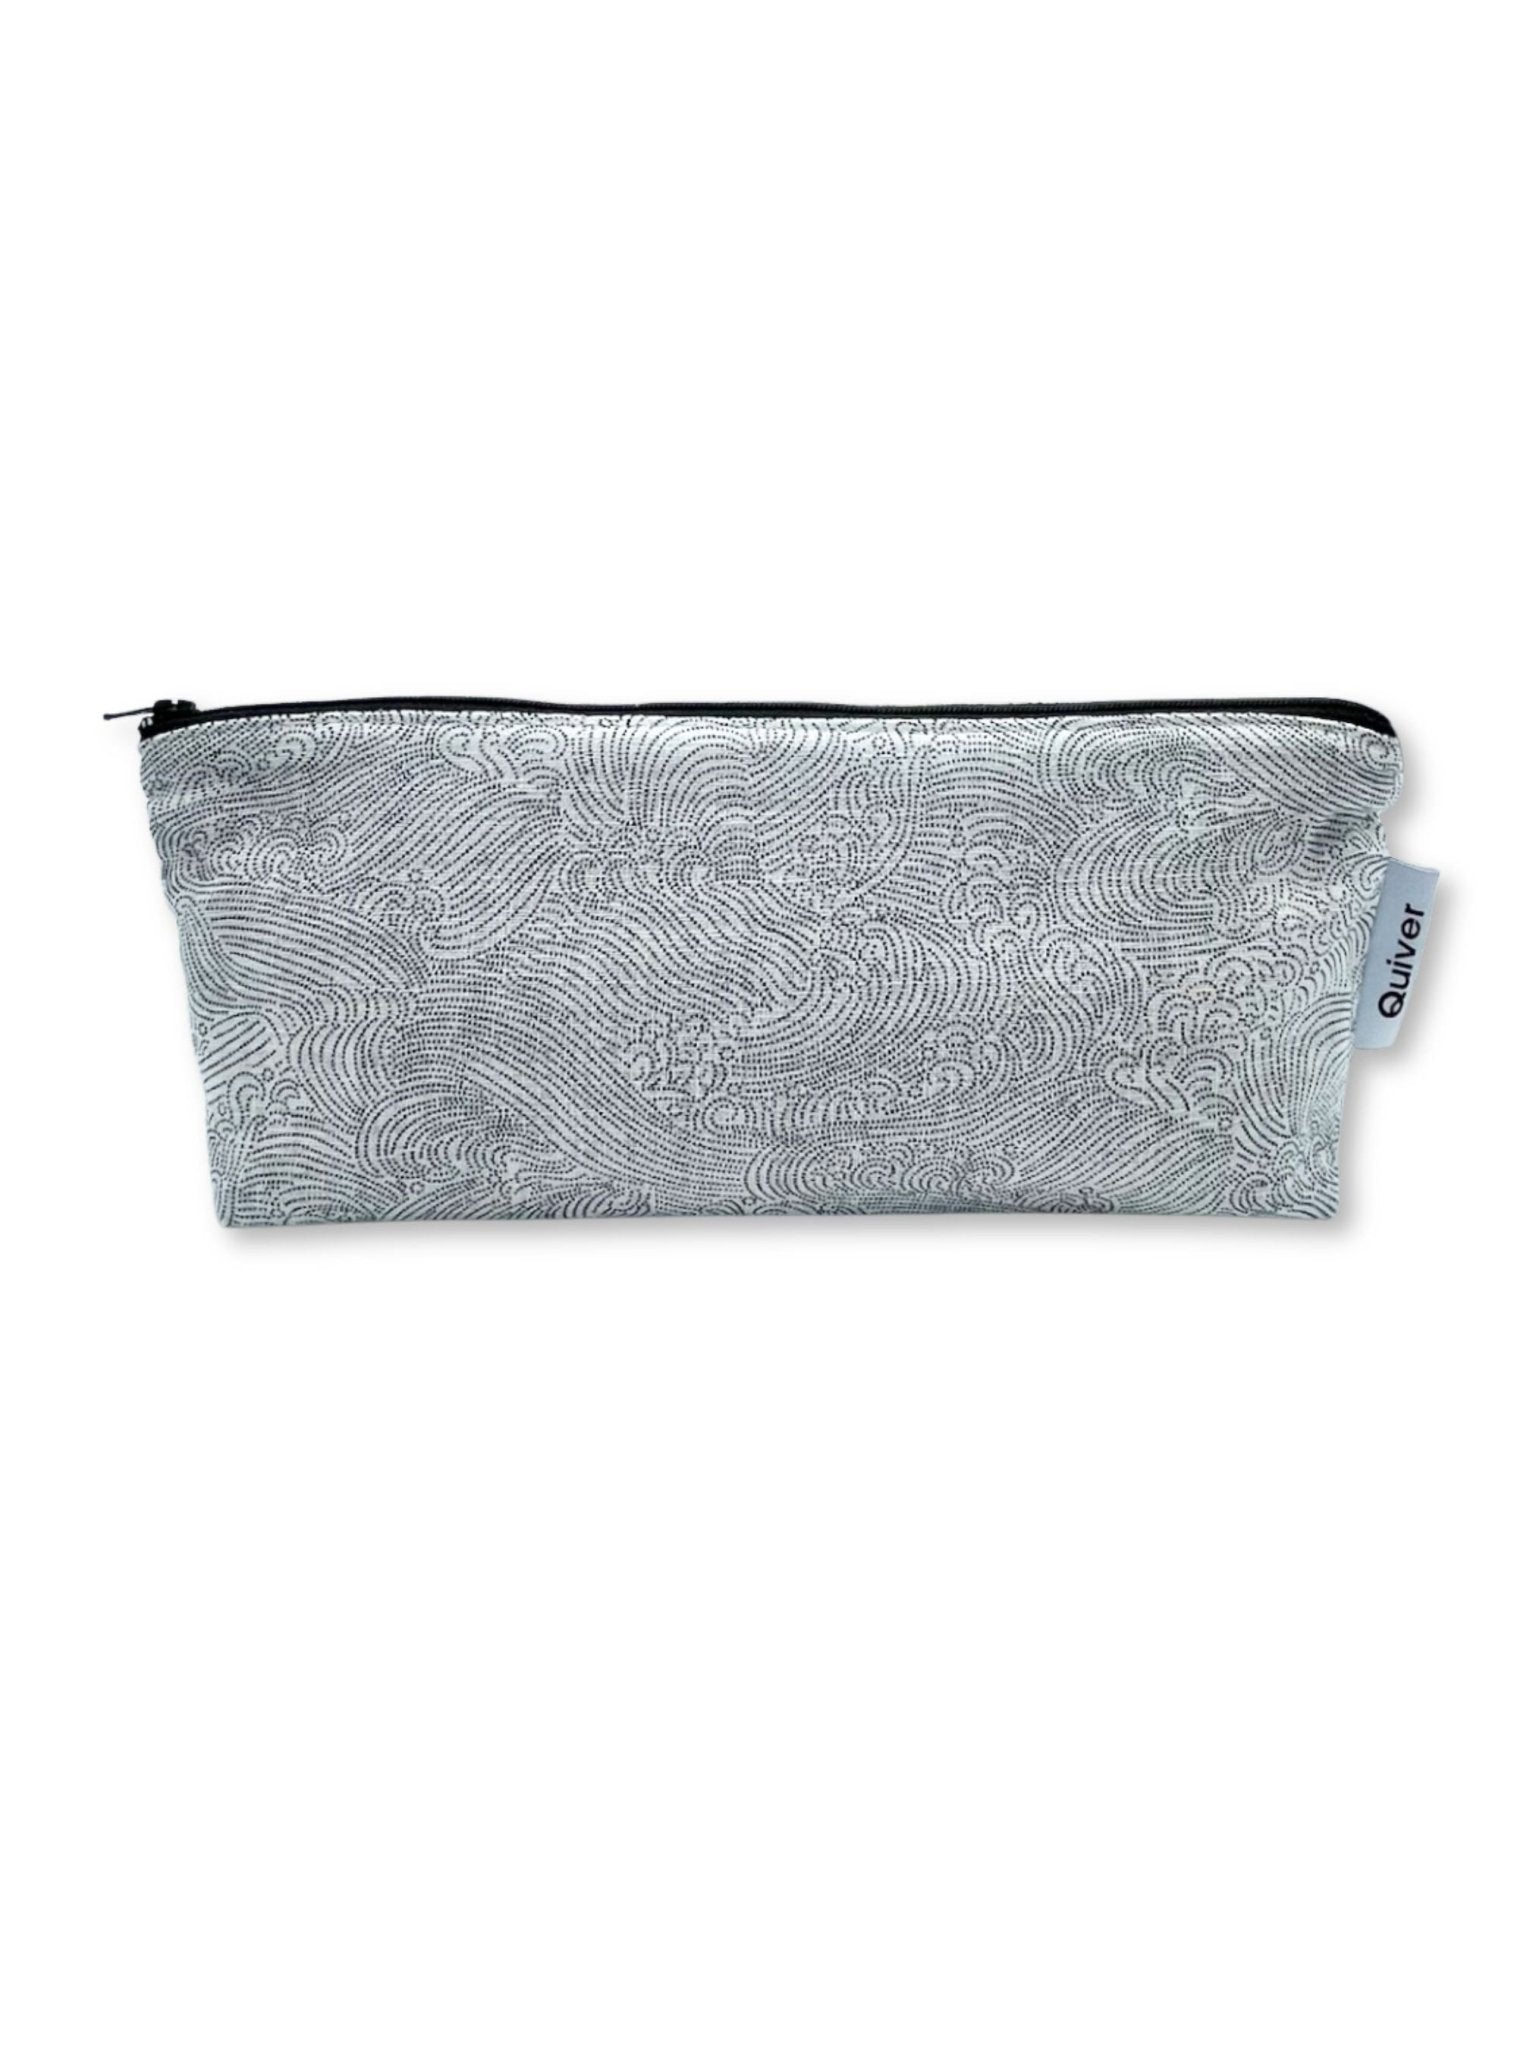 Vibe Pouch | Japanese Waves